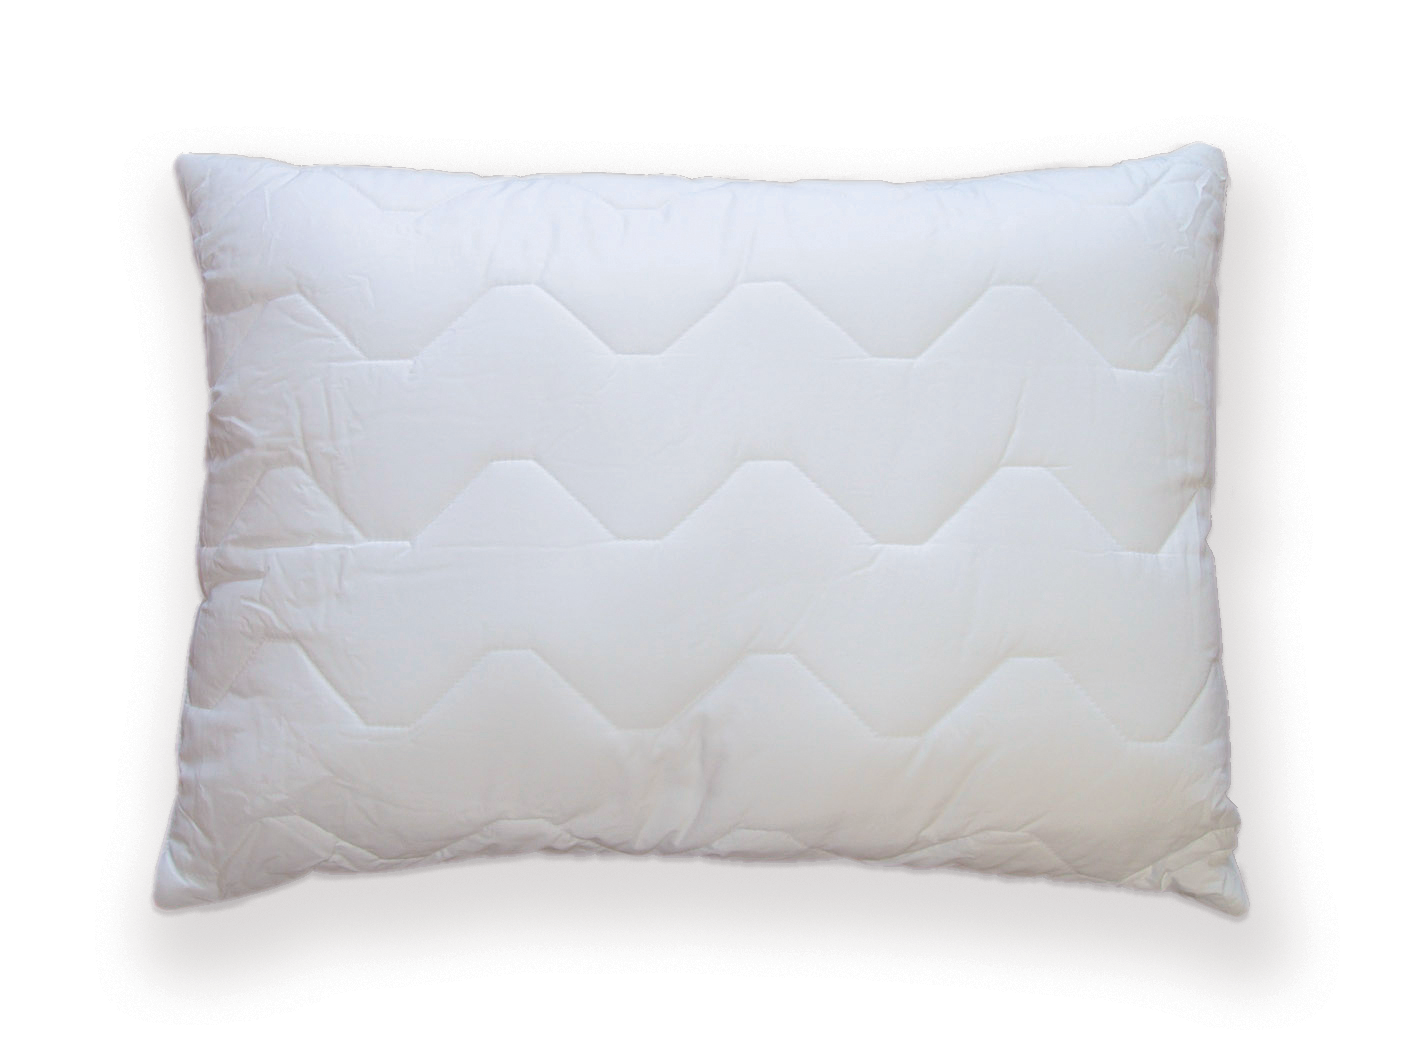 Trubliss Luxury Washable Pillow